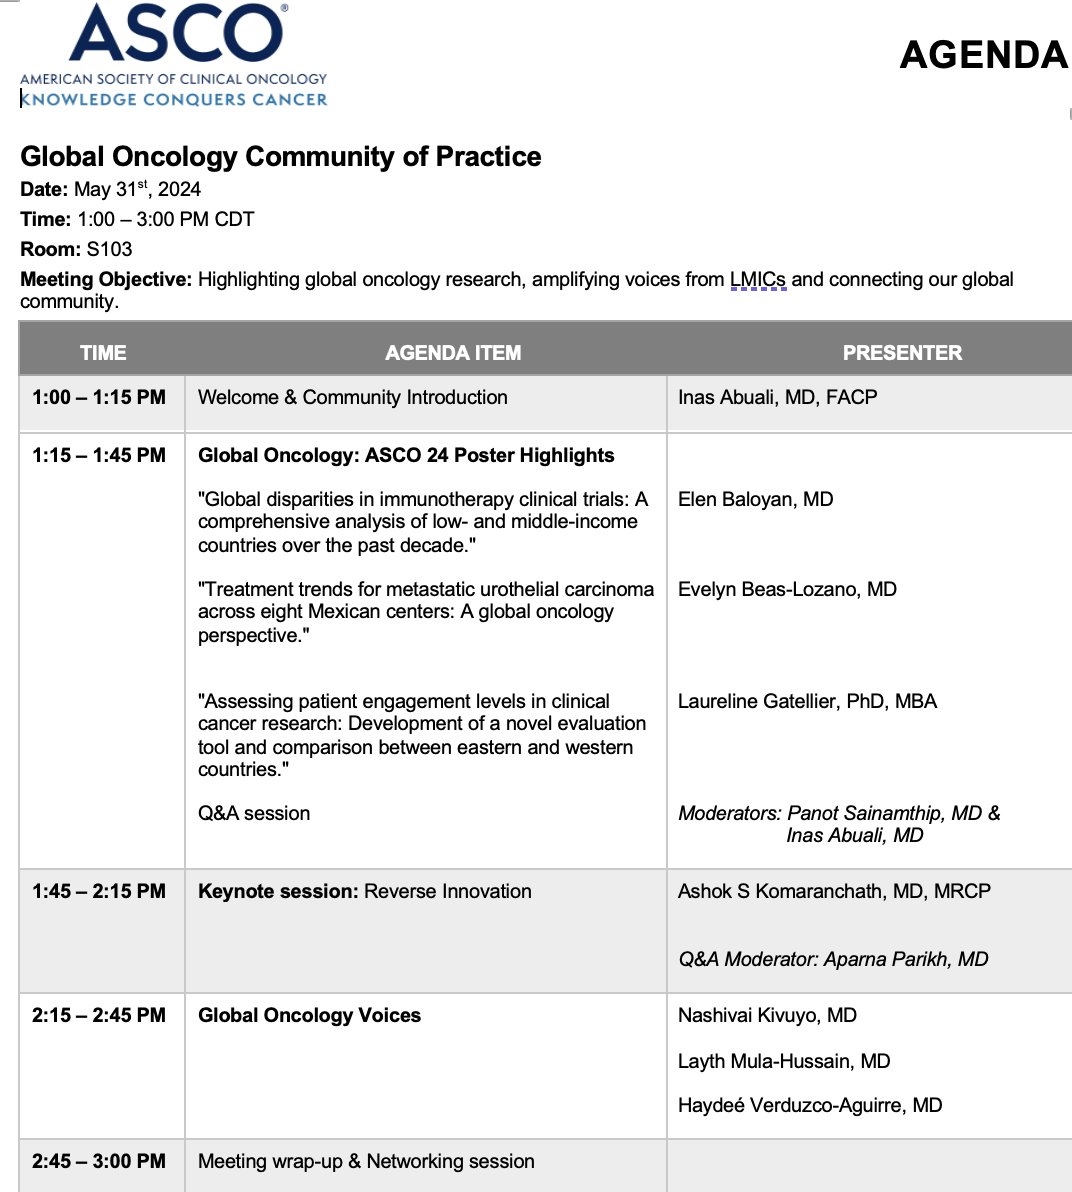 @ASCO #ASCO2024 #ASCO24 will be here in no time. Besides all things #crcsm and @gionc, couldn't be more excited to have the 1st in person gathering of the #globalonc CoP them team has put together a great agenda representing many diverse voices!